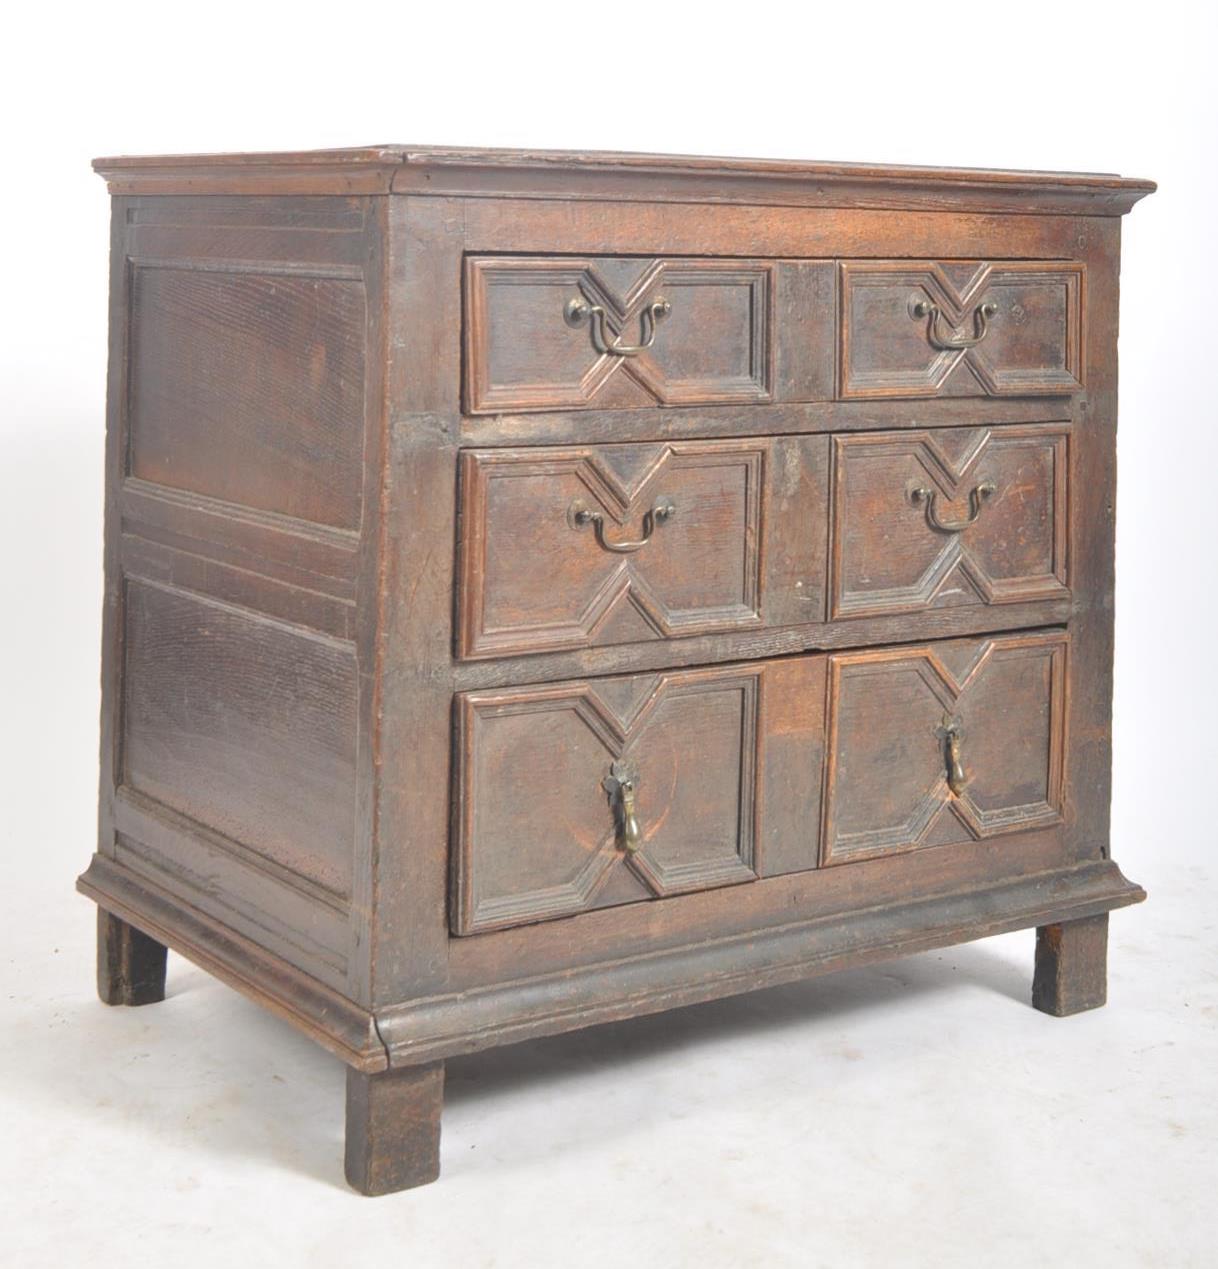 17TH CENTURY JACOBEAN PERIOD OAK WOOD CHEST OF DRAWERS - Image 2 of 7